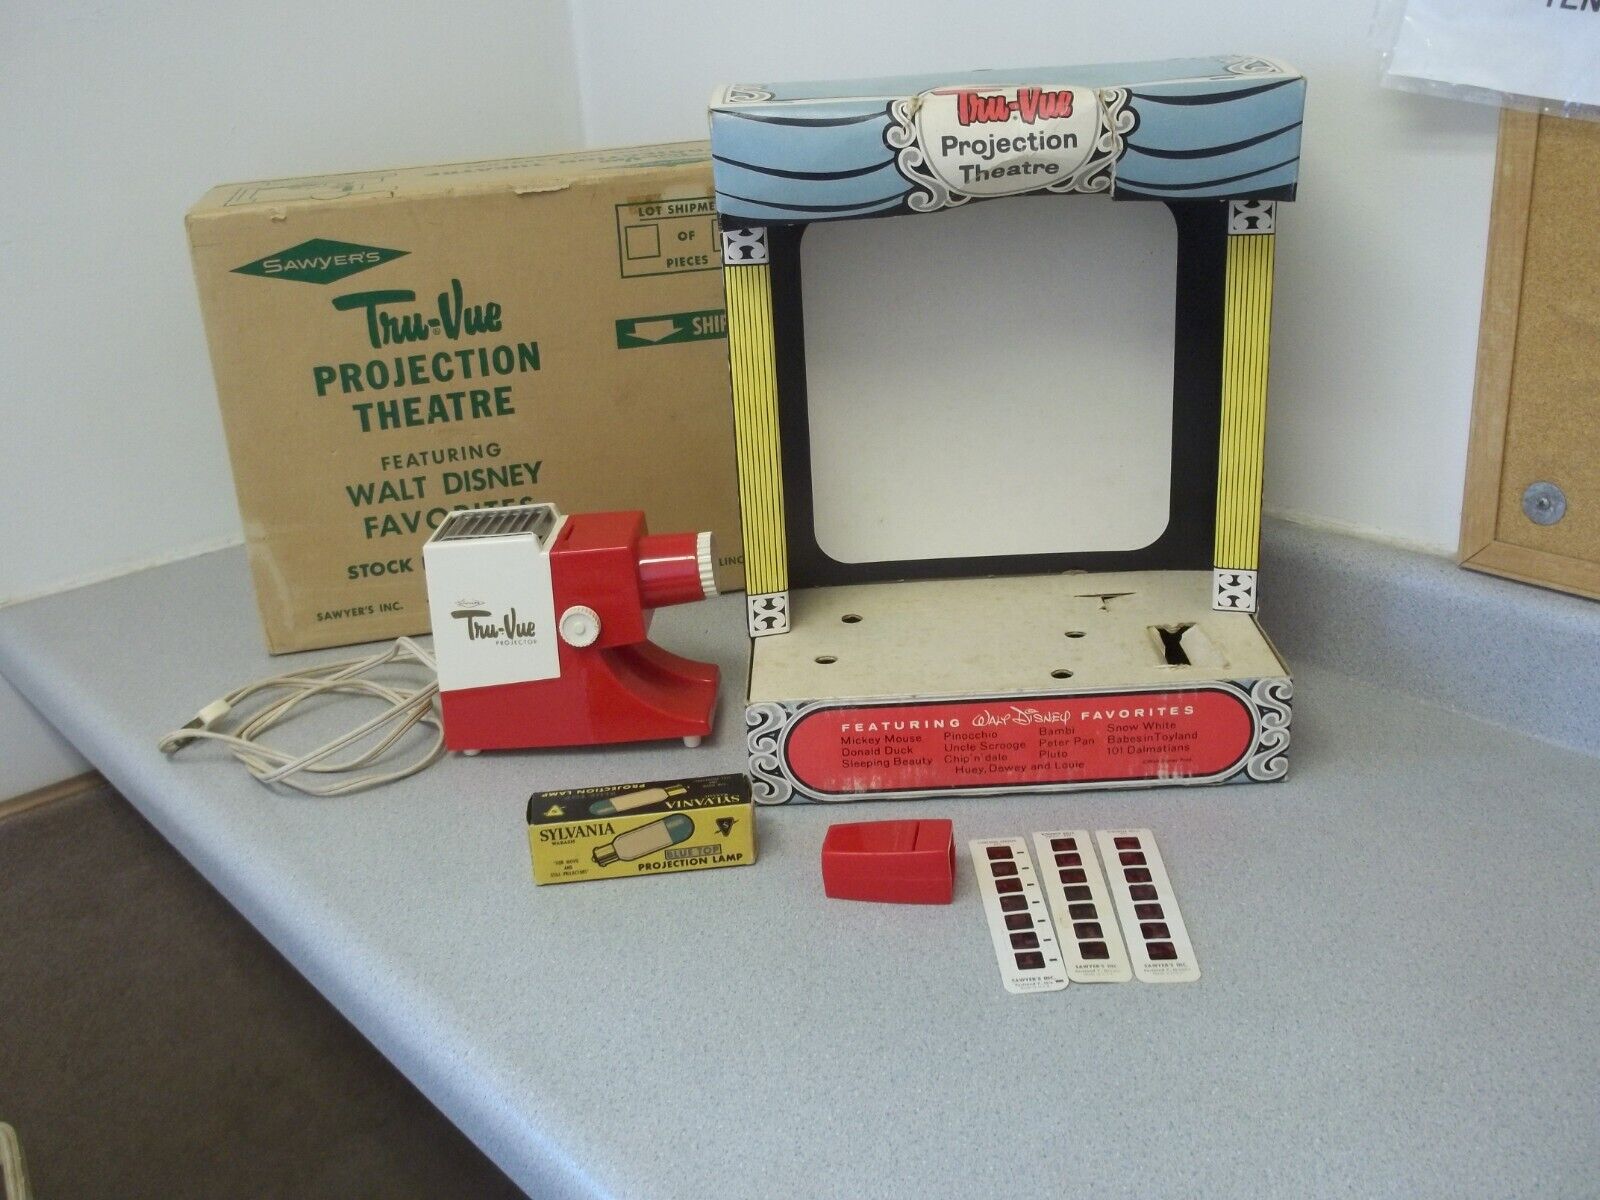 Tru Vue Projection Theatre with original box and a Sawyers viewer with slides